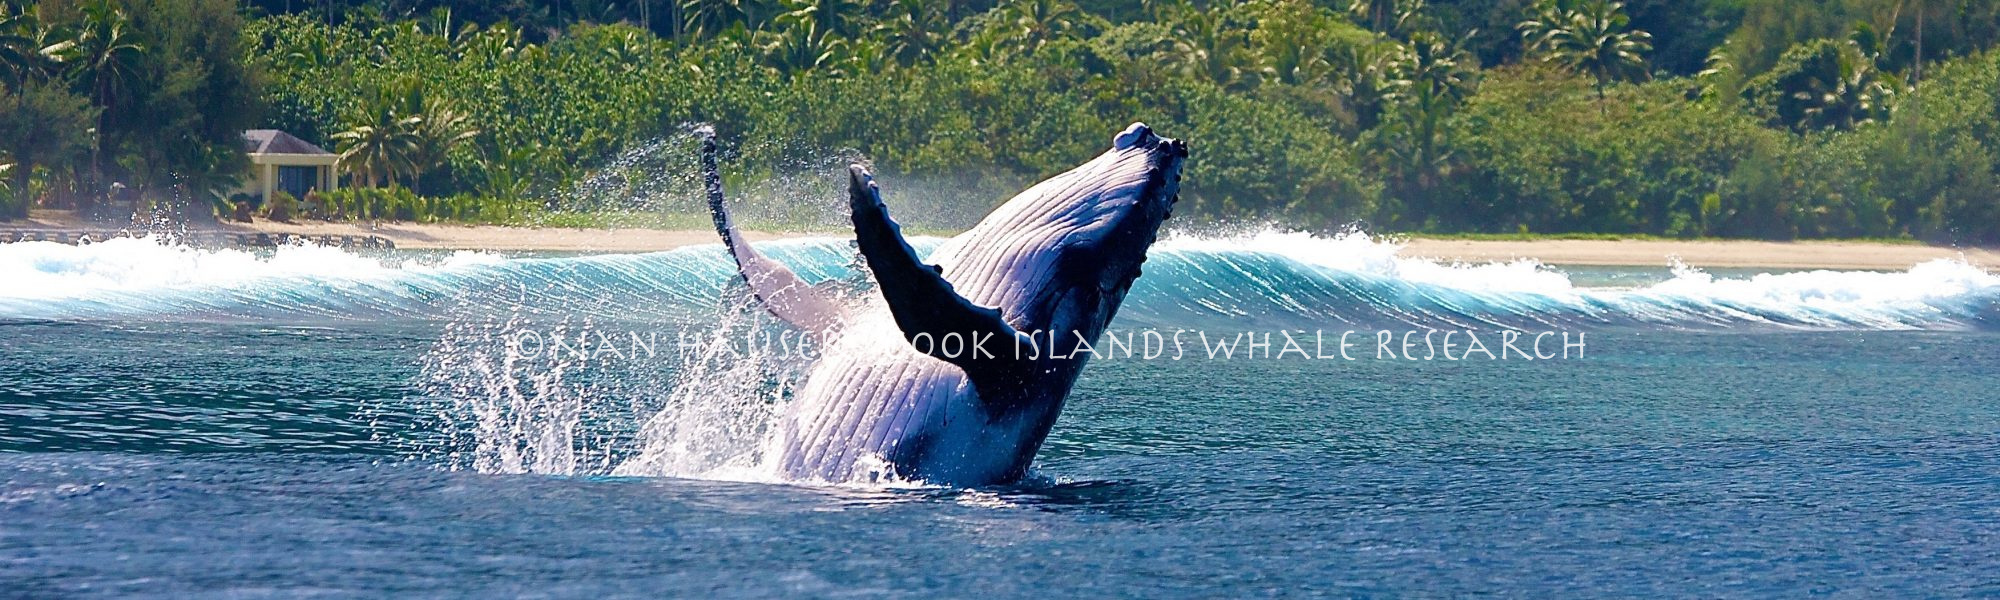 Whale Flipping in Water